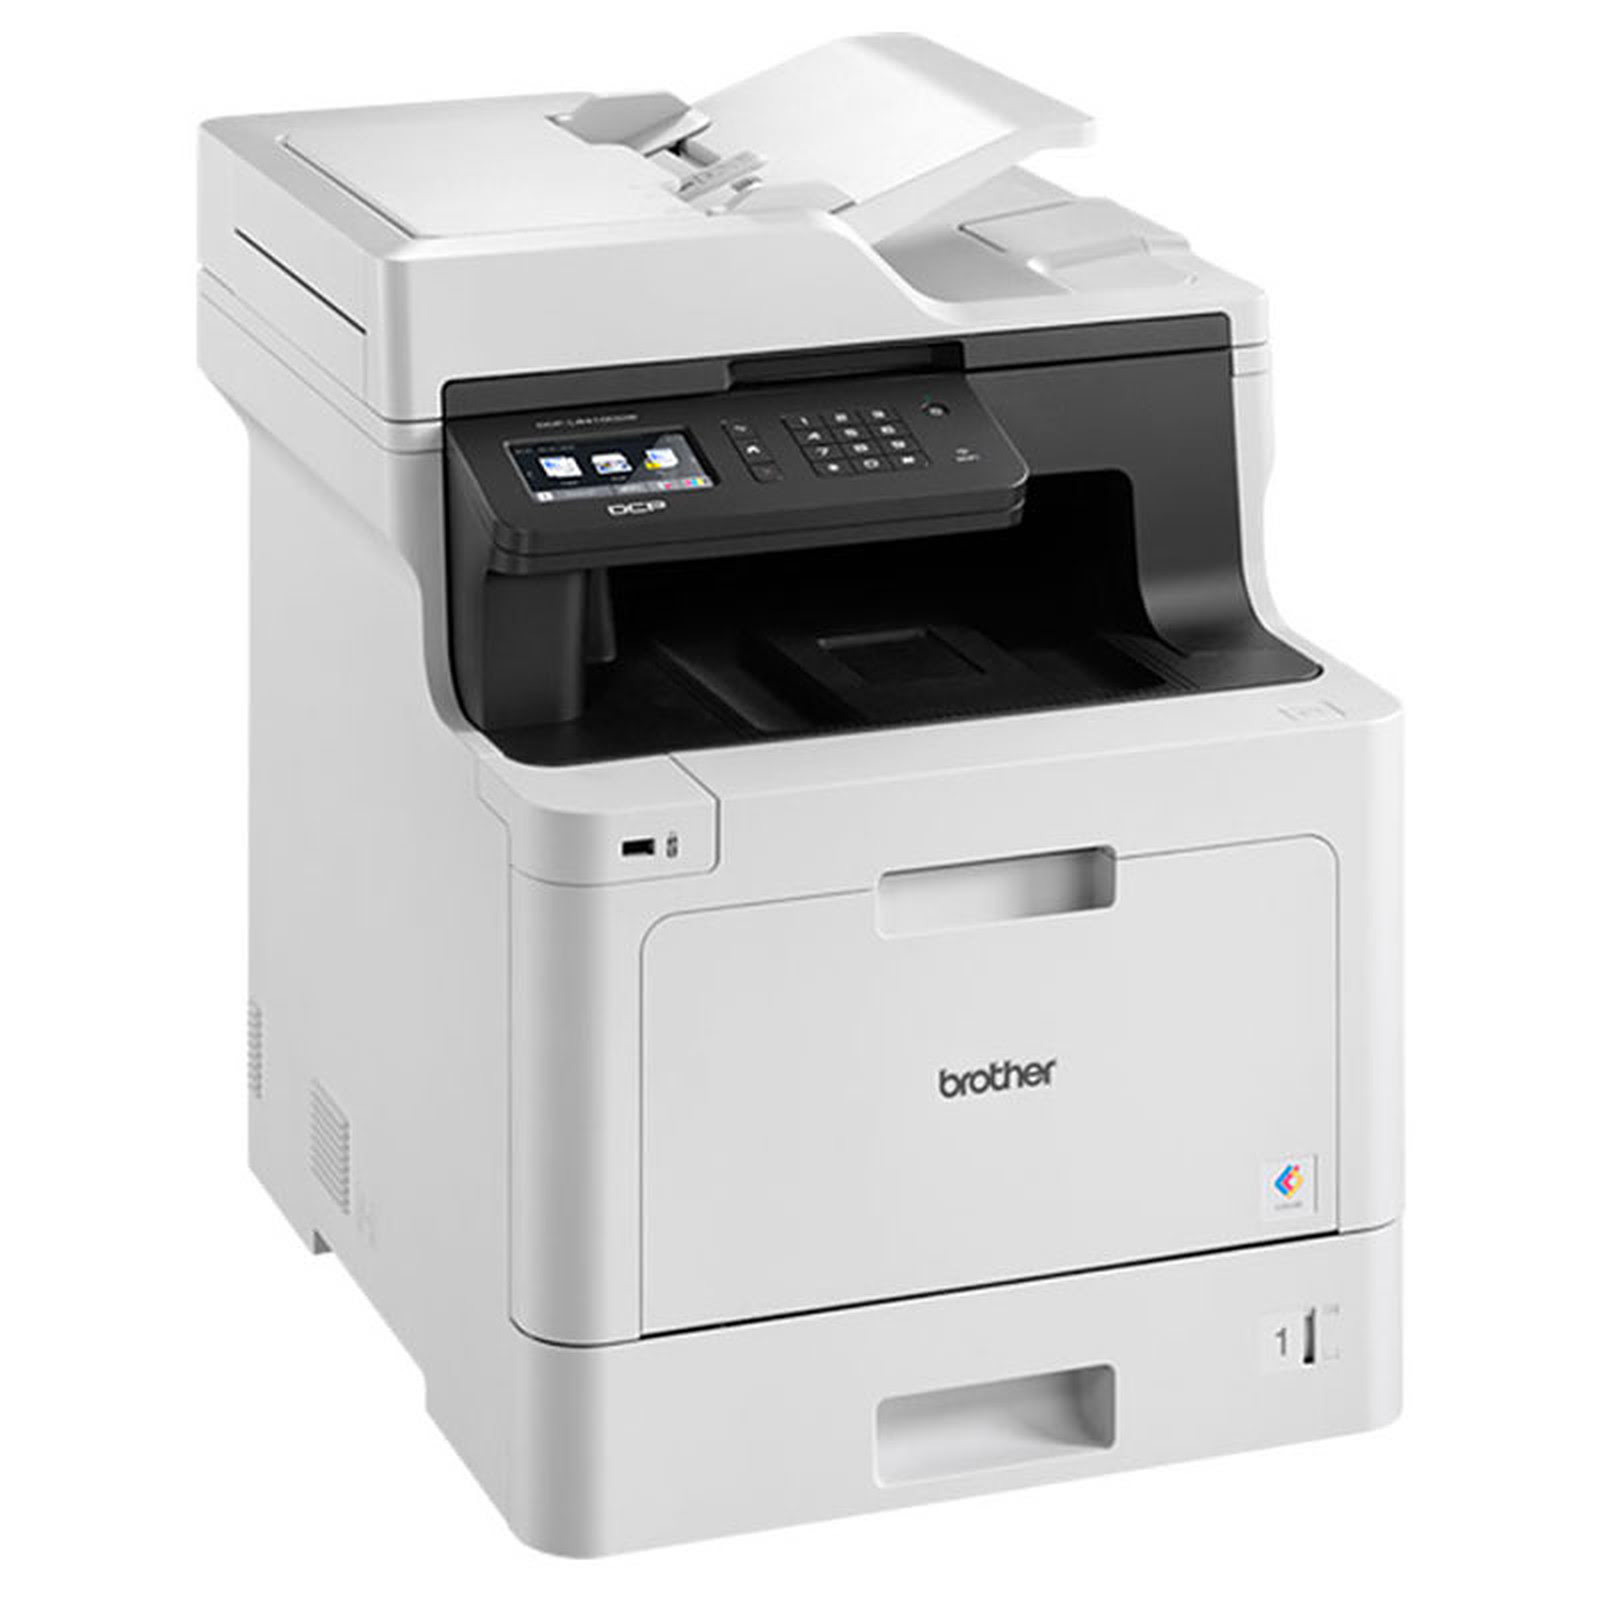 Imprimante multifonction Brother DCP-L8410CDW - grosbill-pro.com - 2